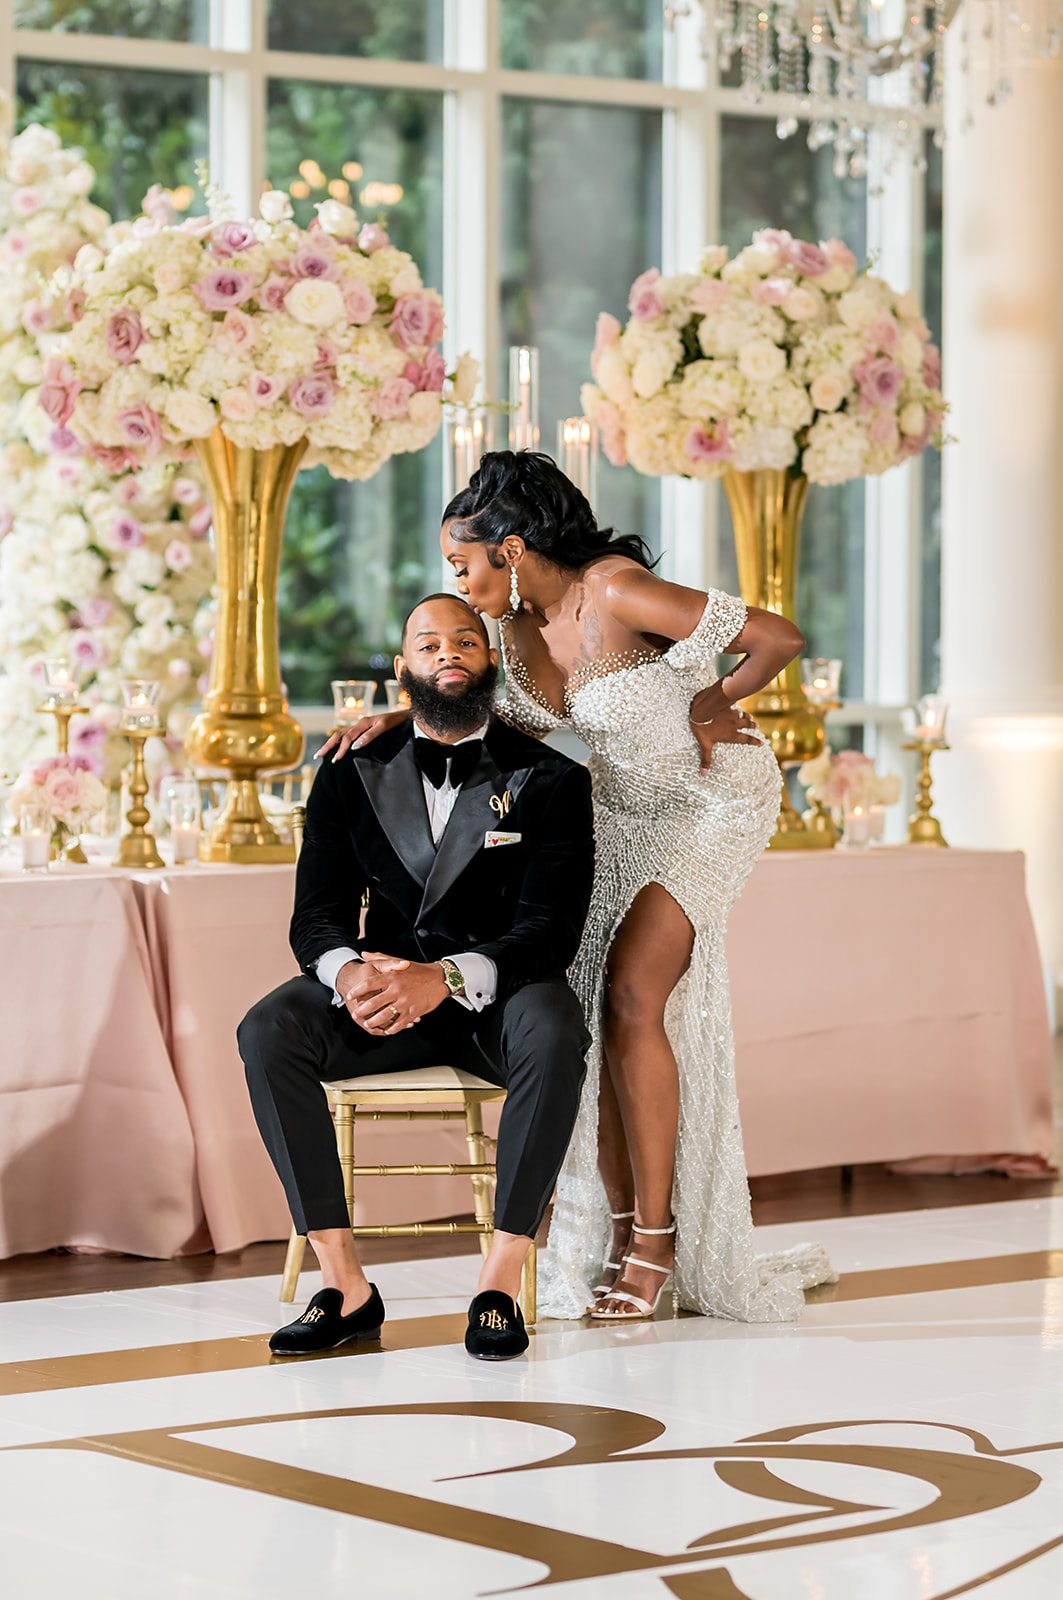 Wedding day reception reveal for the bride and groom at Ashton gardens atlanta with JGraced Photography